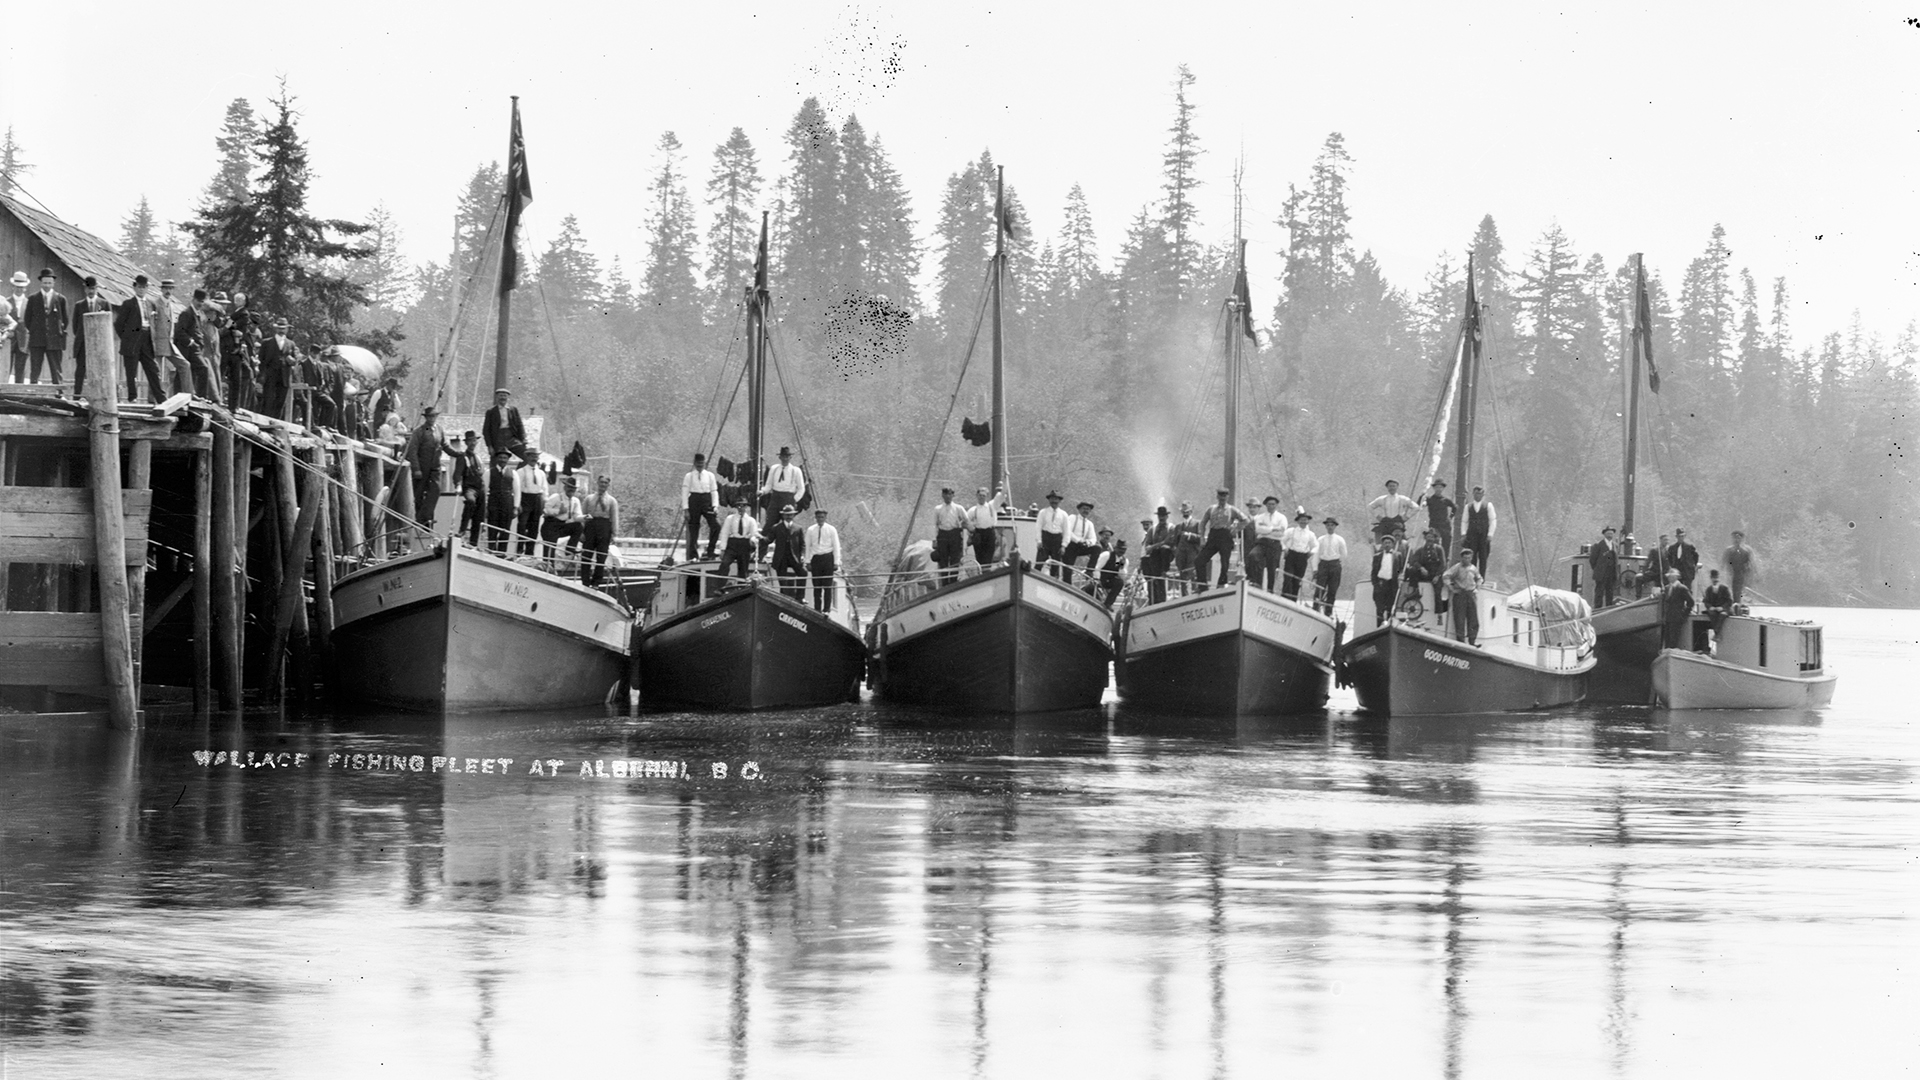 Working People: A History of Labour in British Columbia - E8 - The Fisherman's Strike of 1900